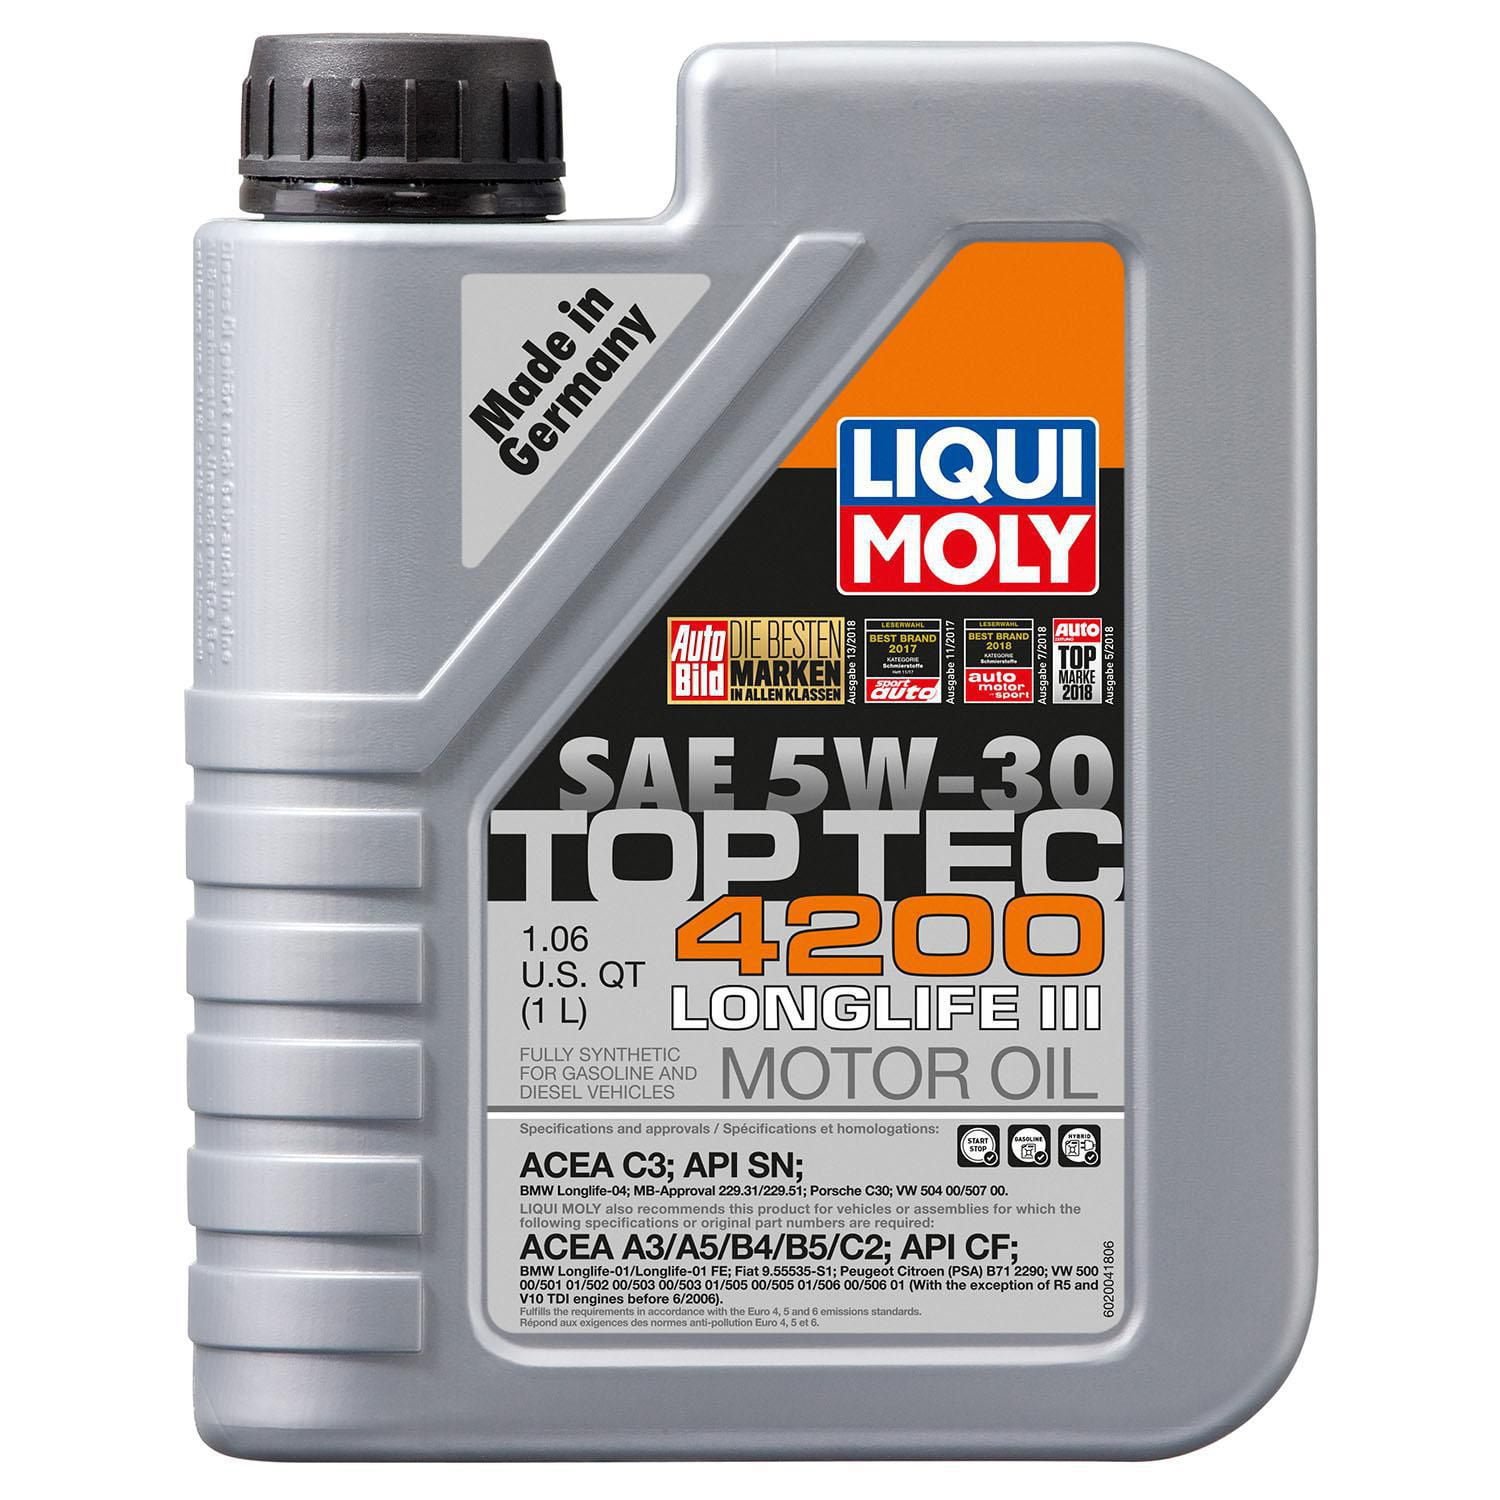 LIQUI MOLY Top Tec 4200 5W30 Full Synthetic Motor Oil - Appropriate For Gasoline And Diesel Engines With Prolonged Service Intervals, 1 liter bottle , sold by - Walmart.com